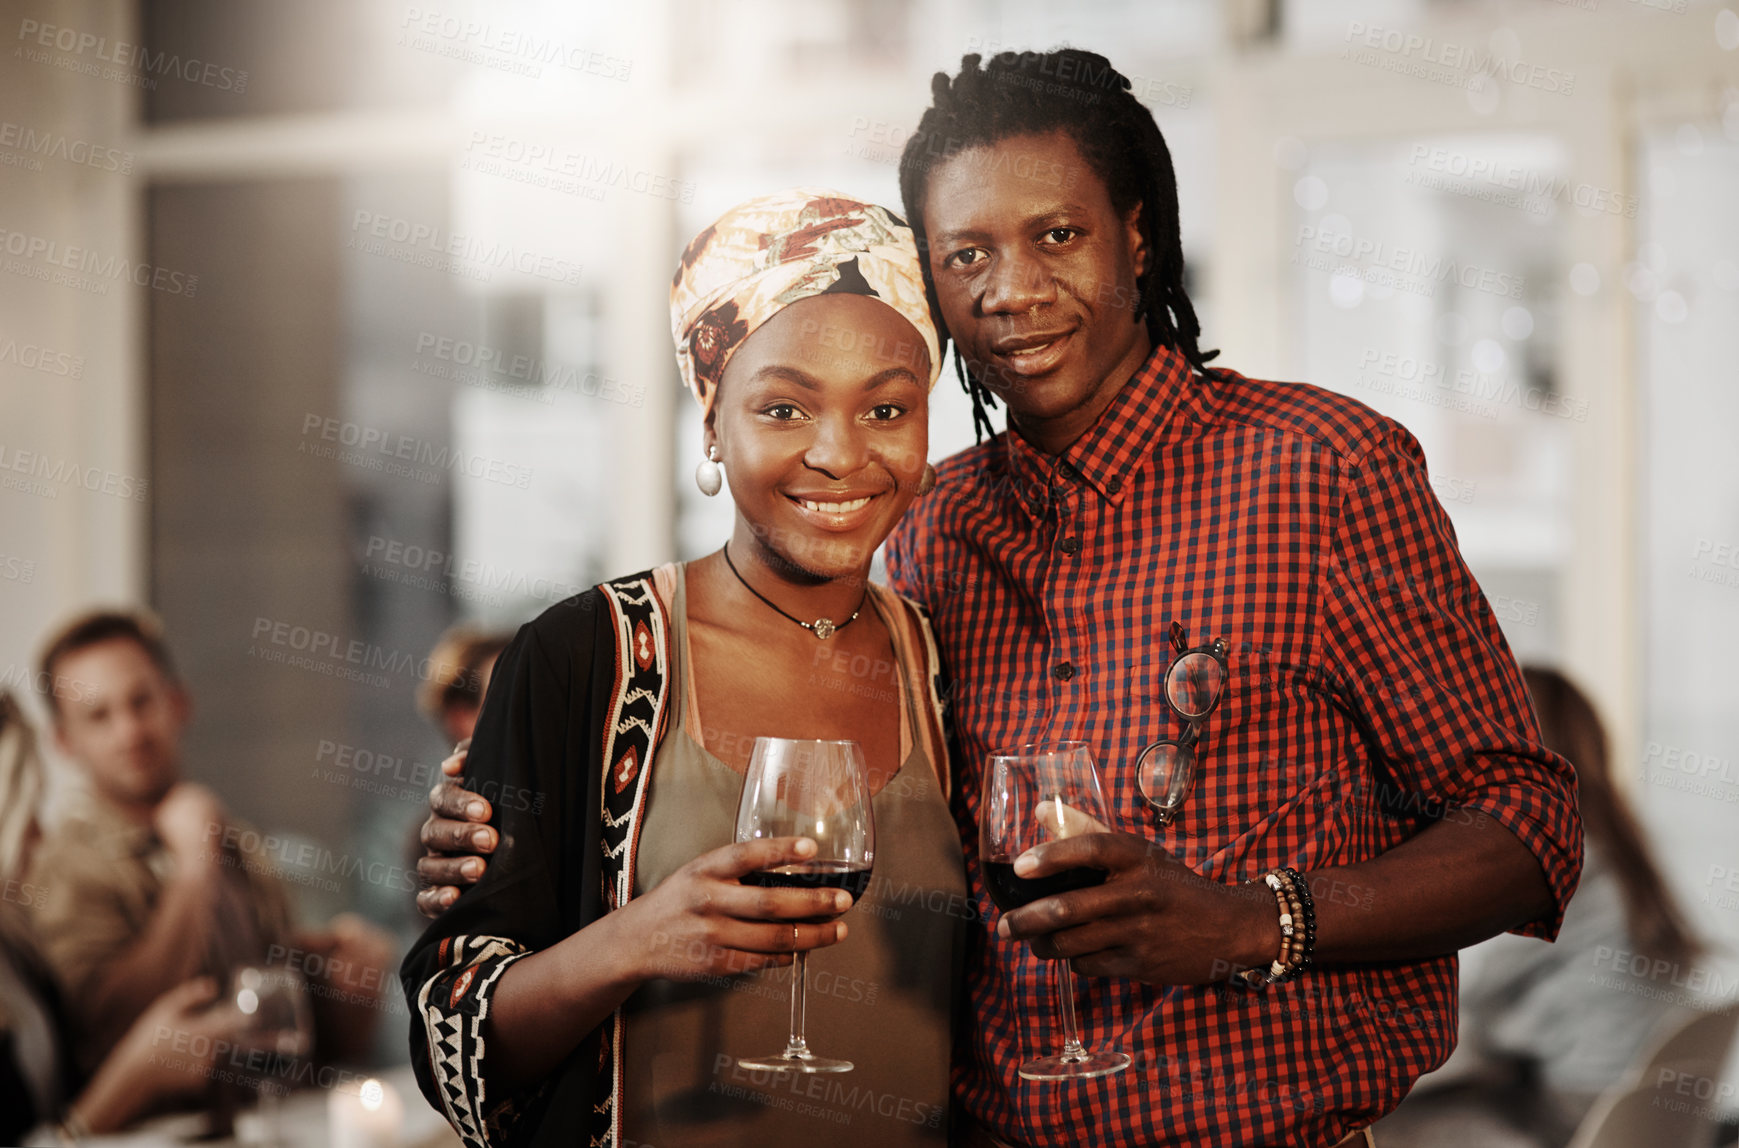 Buy stock photo Cropped portrait of an affectionate young couple enjoying a glass of wine